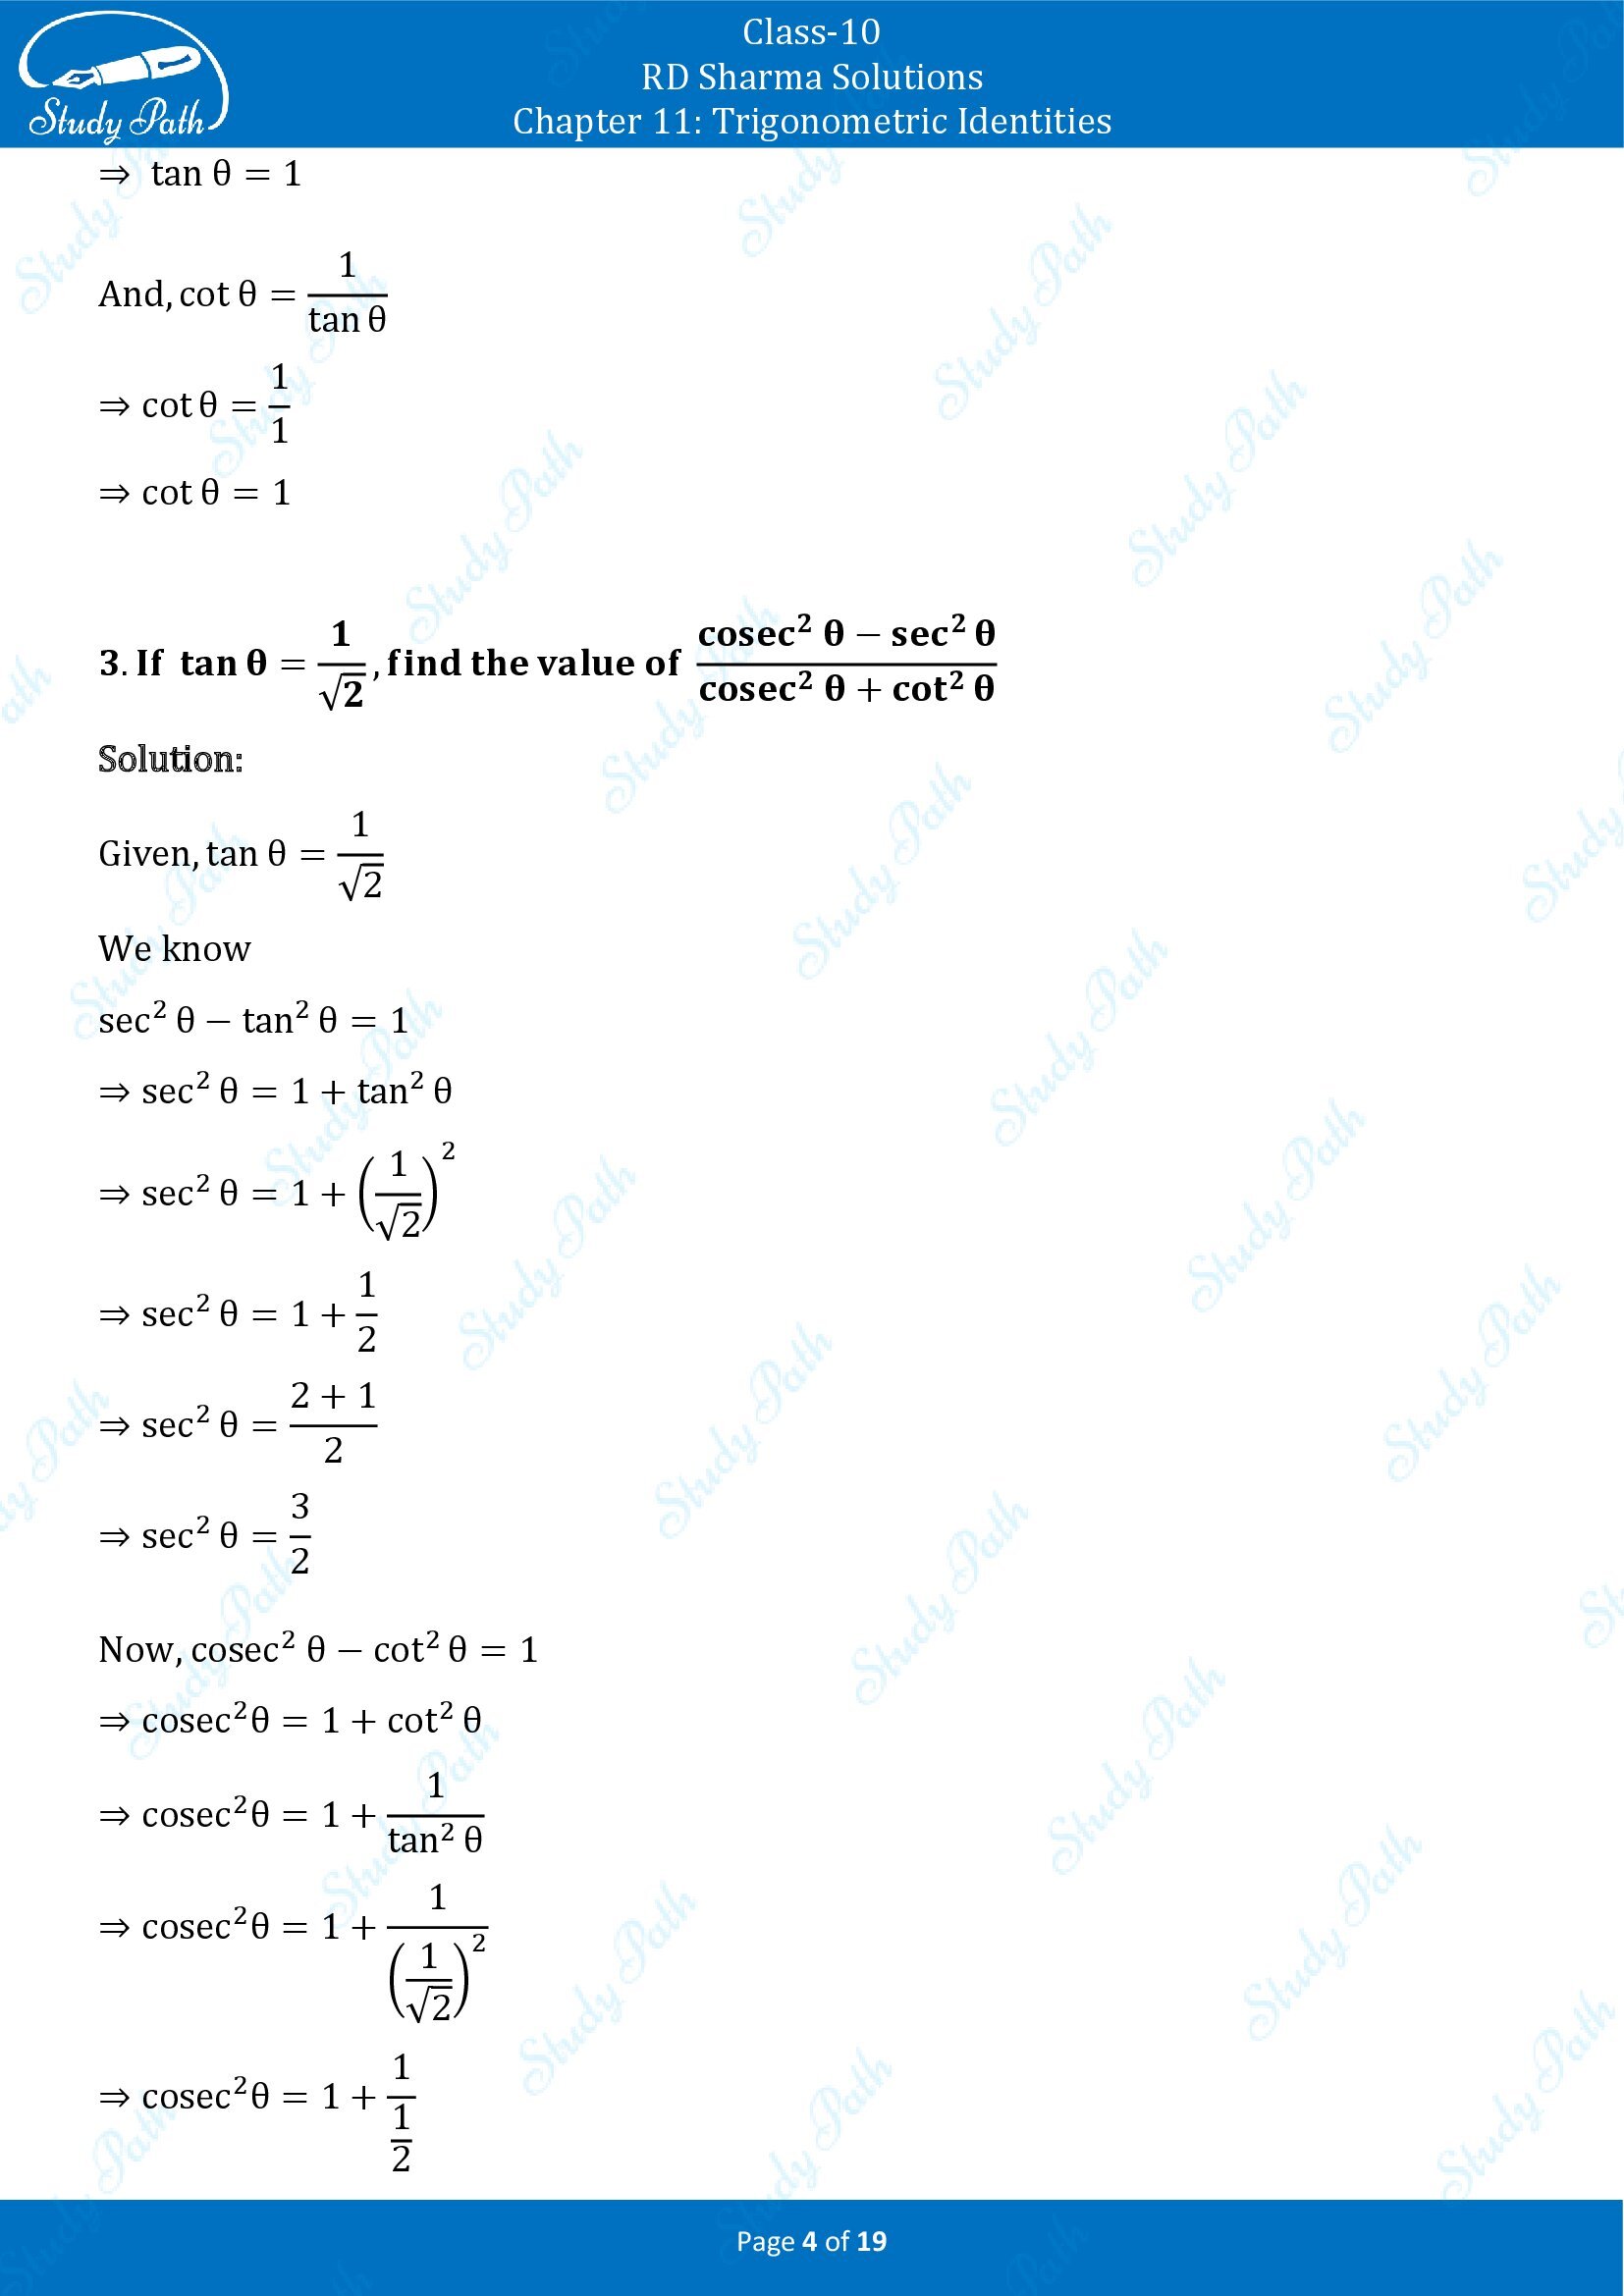 RD Sharma Solutions Class 10 Chapter 11 Trigonometric Identities Exercise 11.2 00004